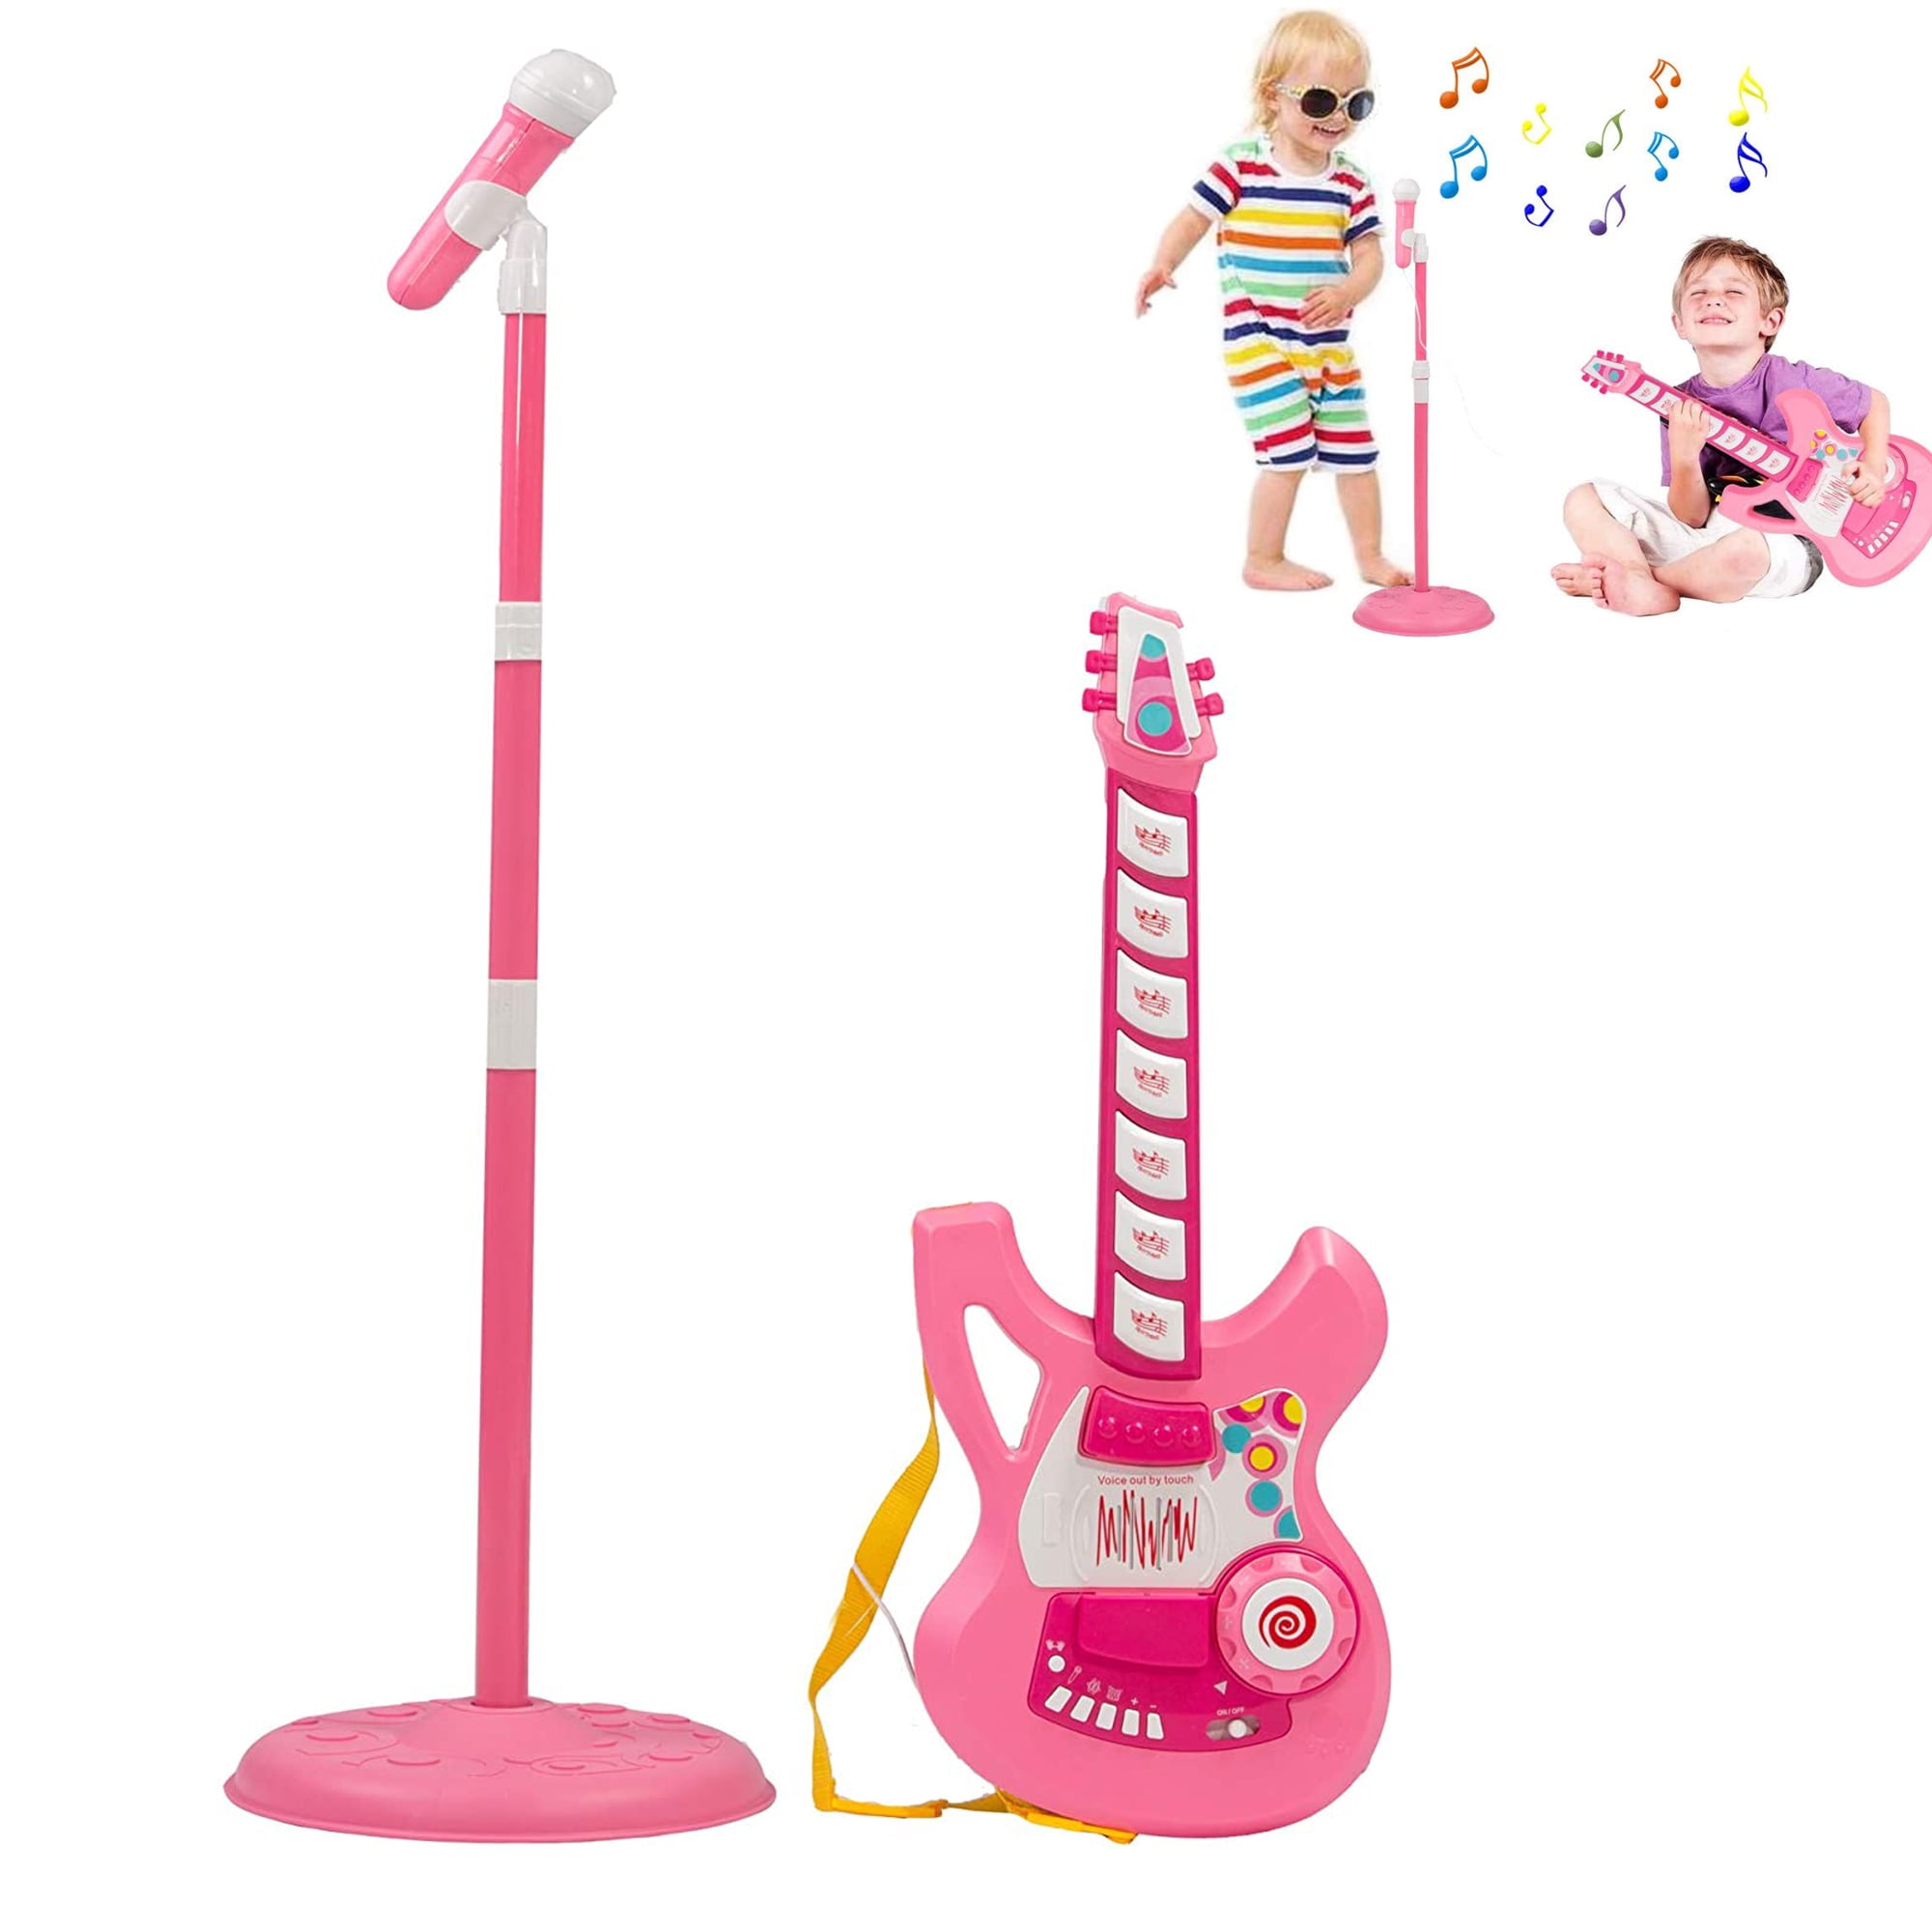 KARMAS PRODUCT Kids Electric Guitar Play Set with Microphone